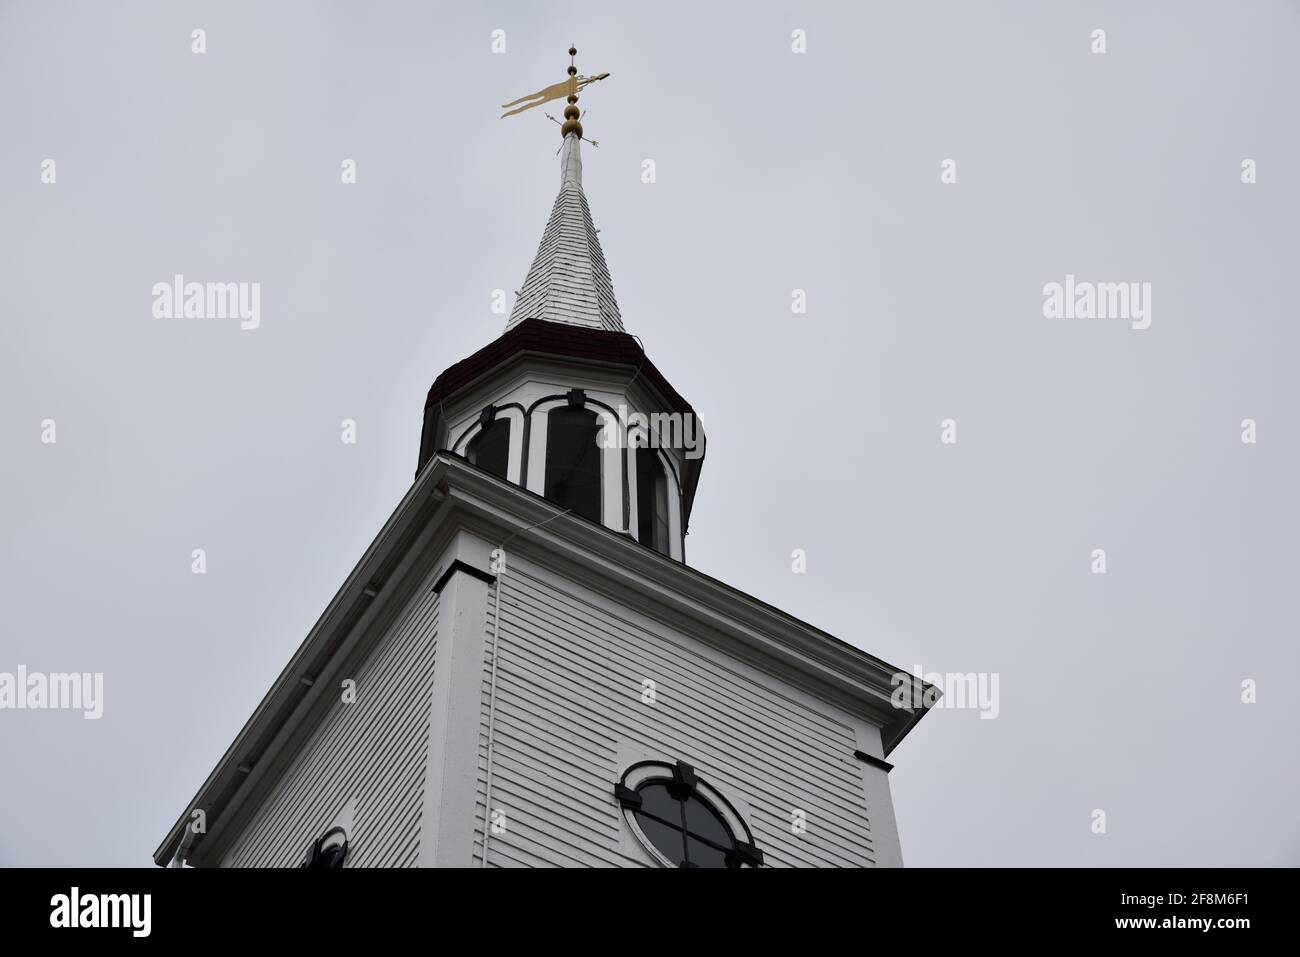 White Steeple of St. John's Anglican Church in Nova Scotia Canada established in 1793 by settlers Stock Photo